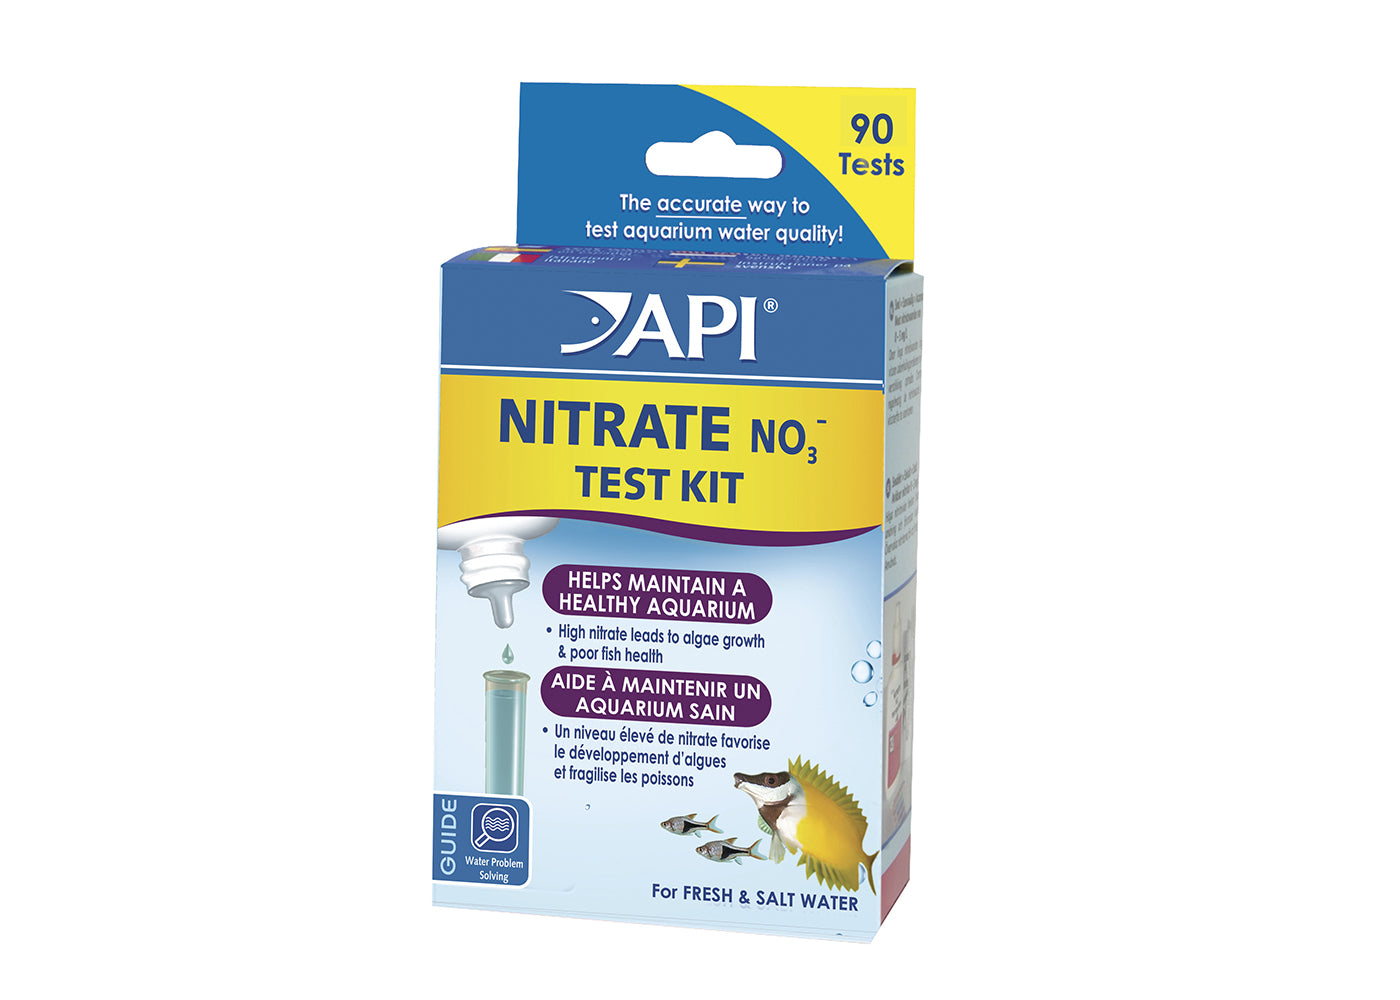 API Nitrate Test Kit NO3, helps maintaine a healthy aquarium for fresh and salt water fish.